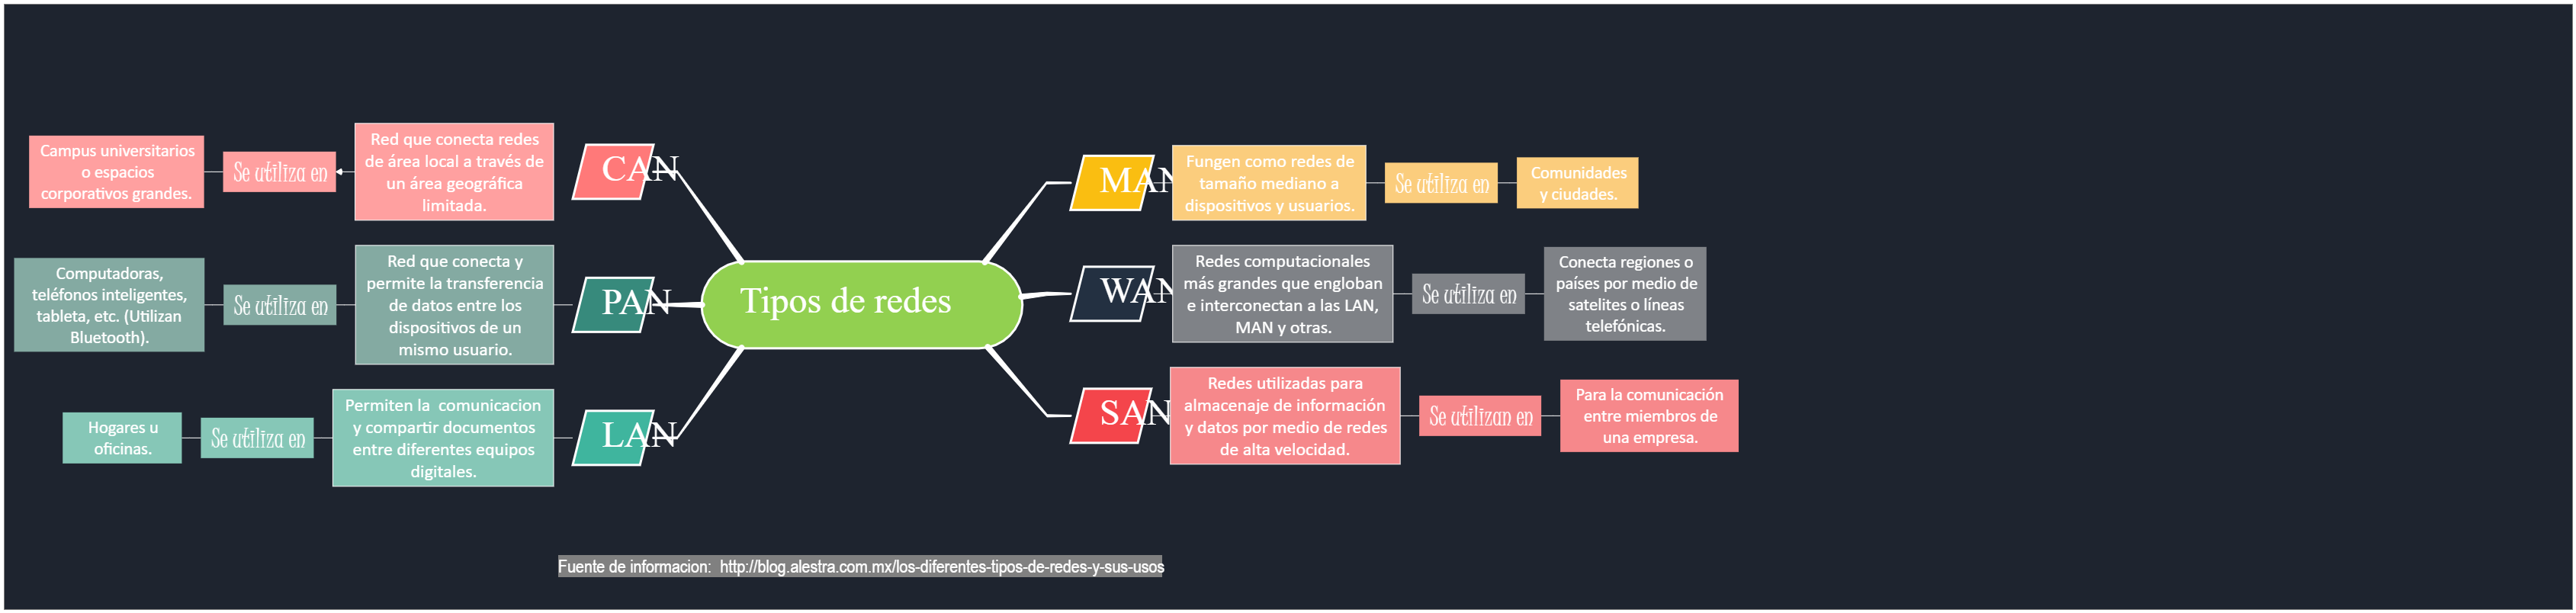 Educational Guidance Concept Map